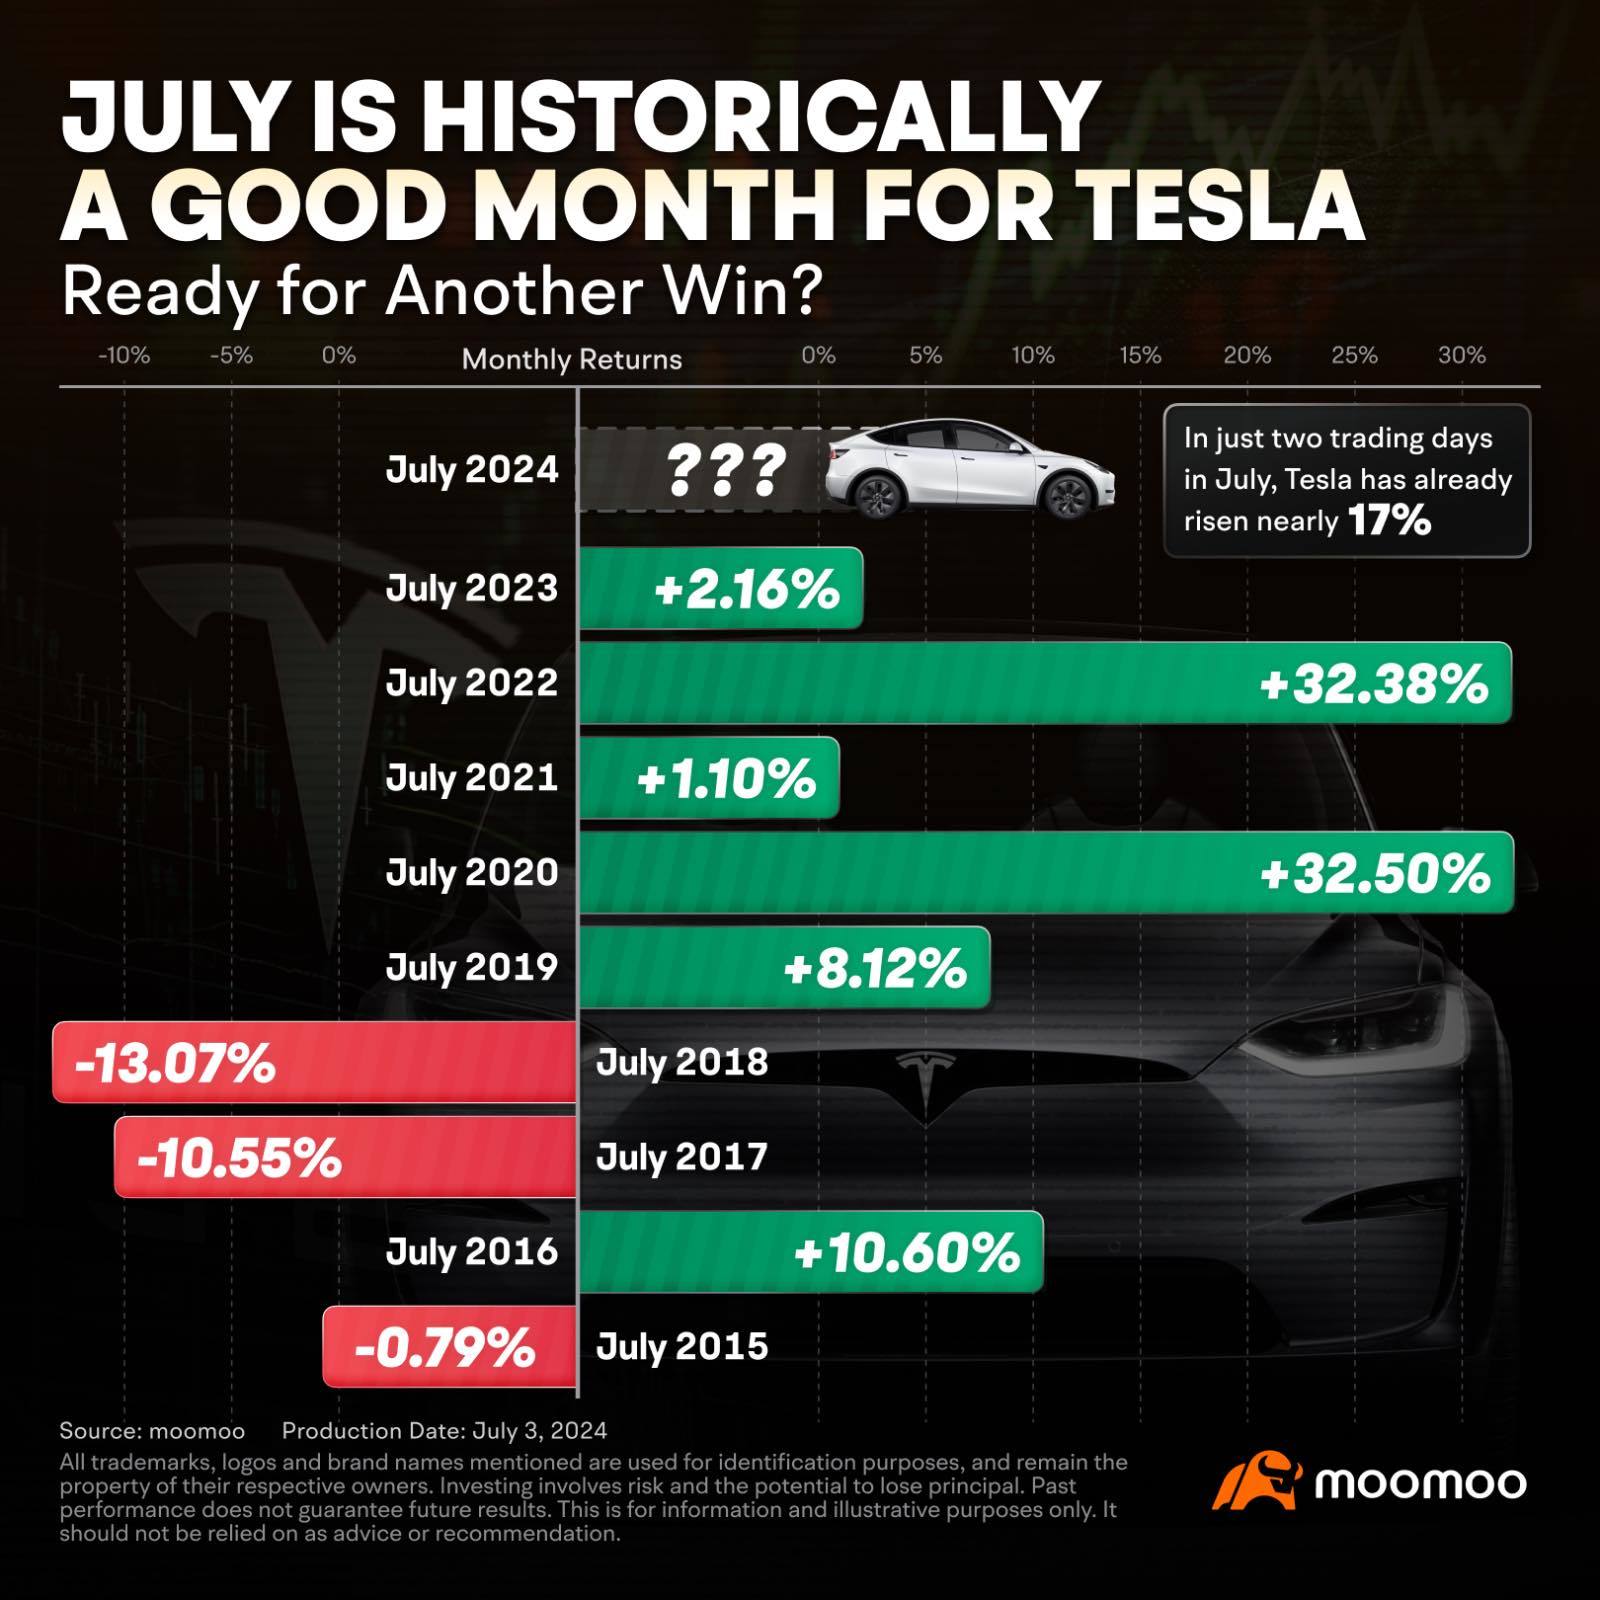 Right time buy Tesla?